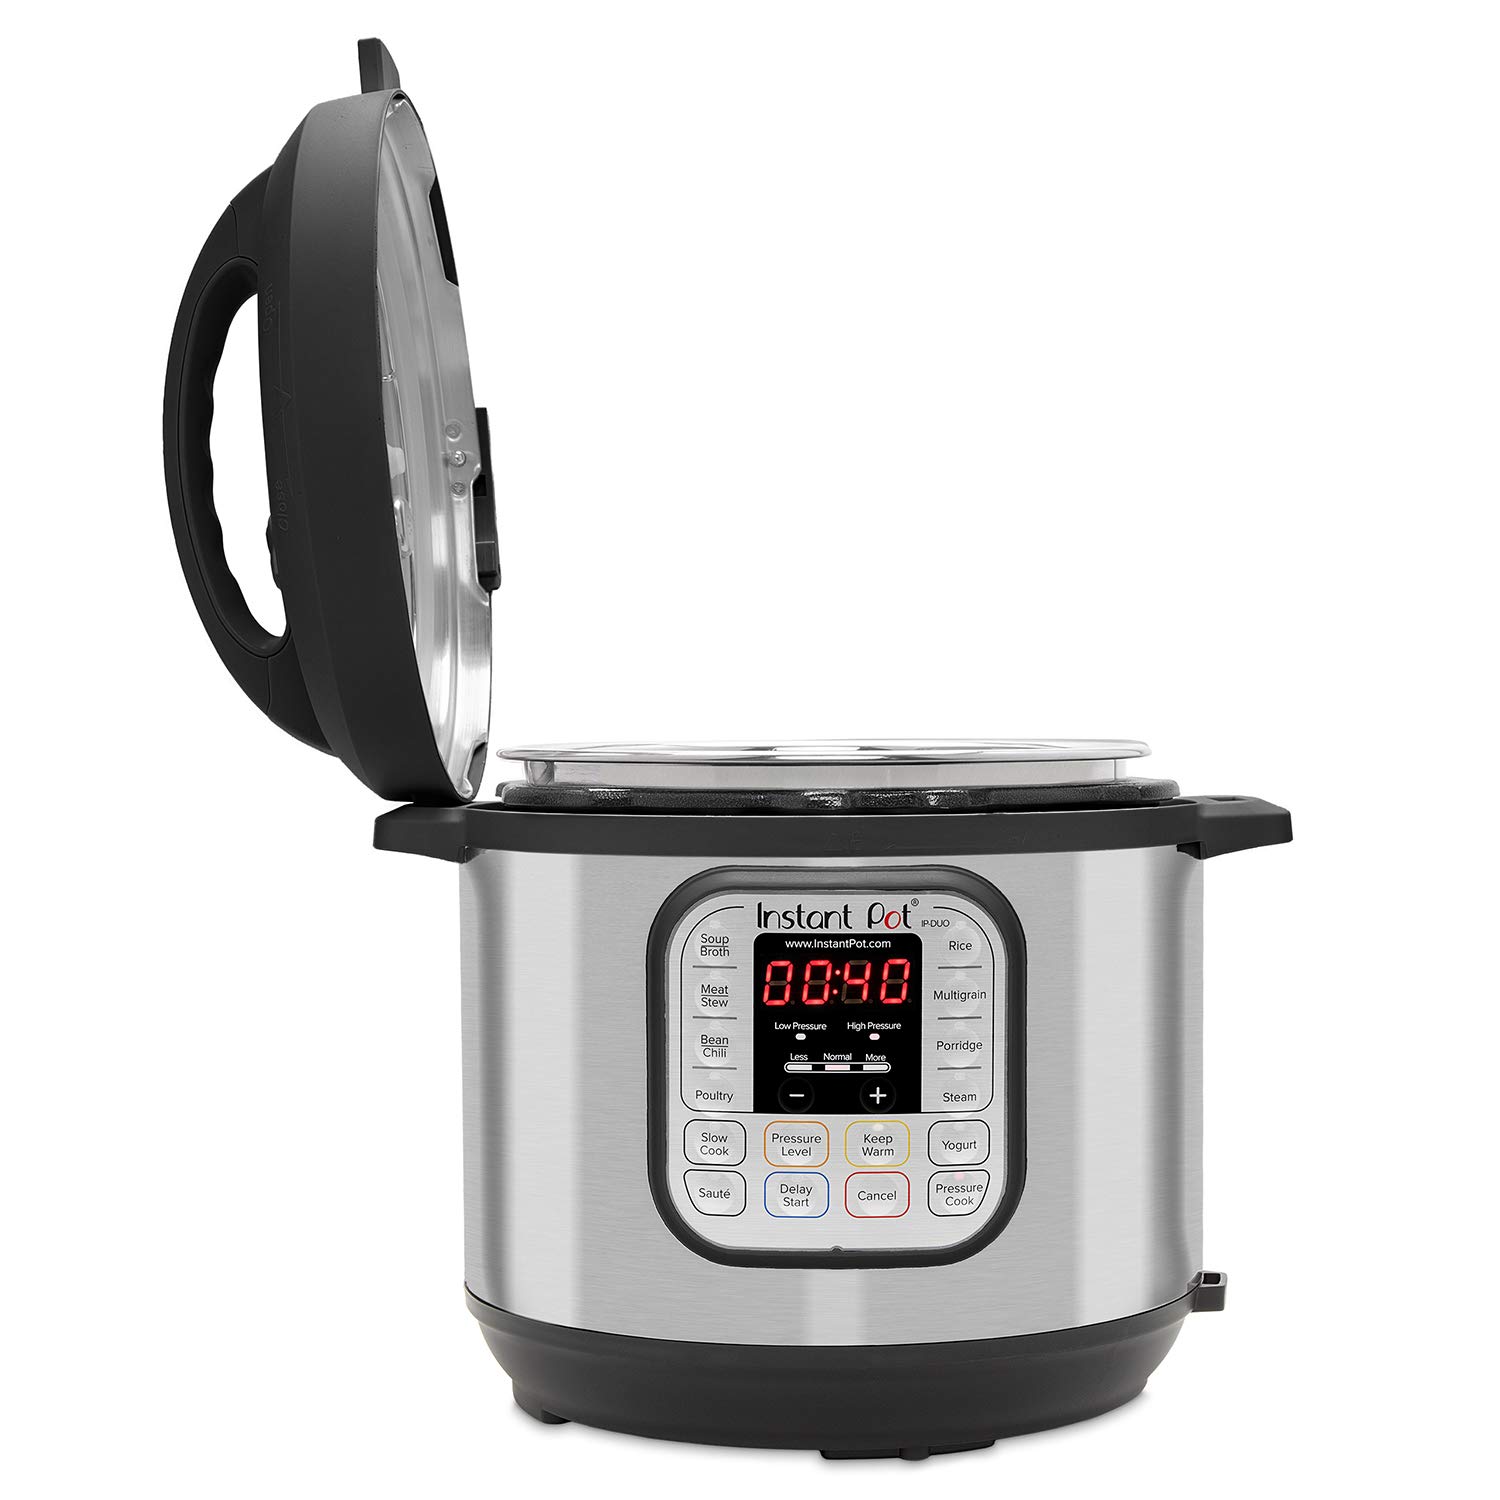 Holiday Gift Guide – Instant Pot 6-Quart Pressure Cooker — Eatwell101